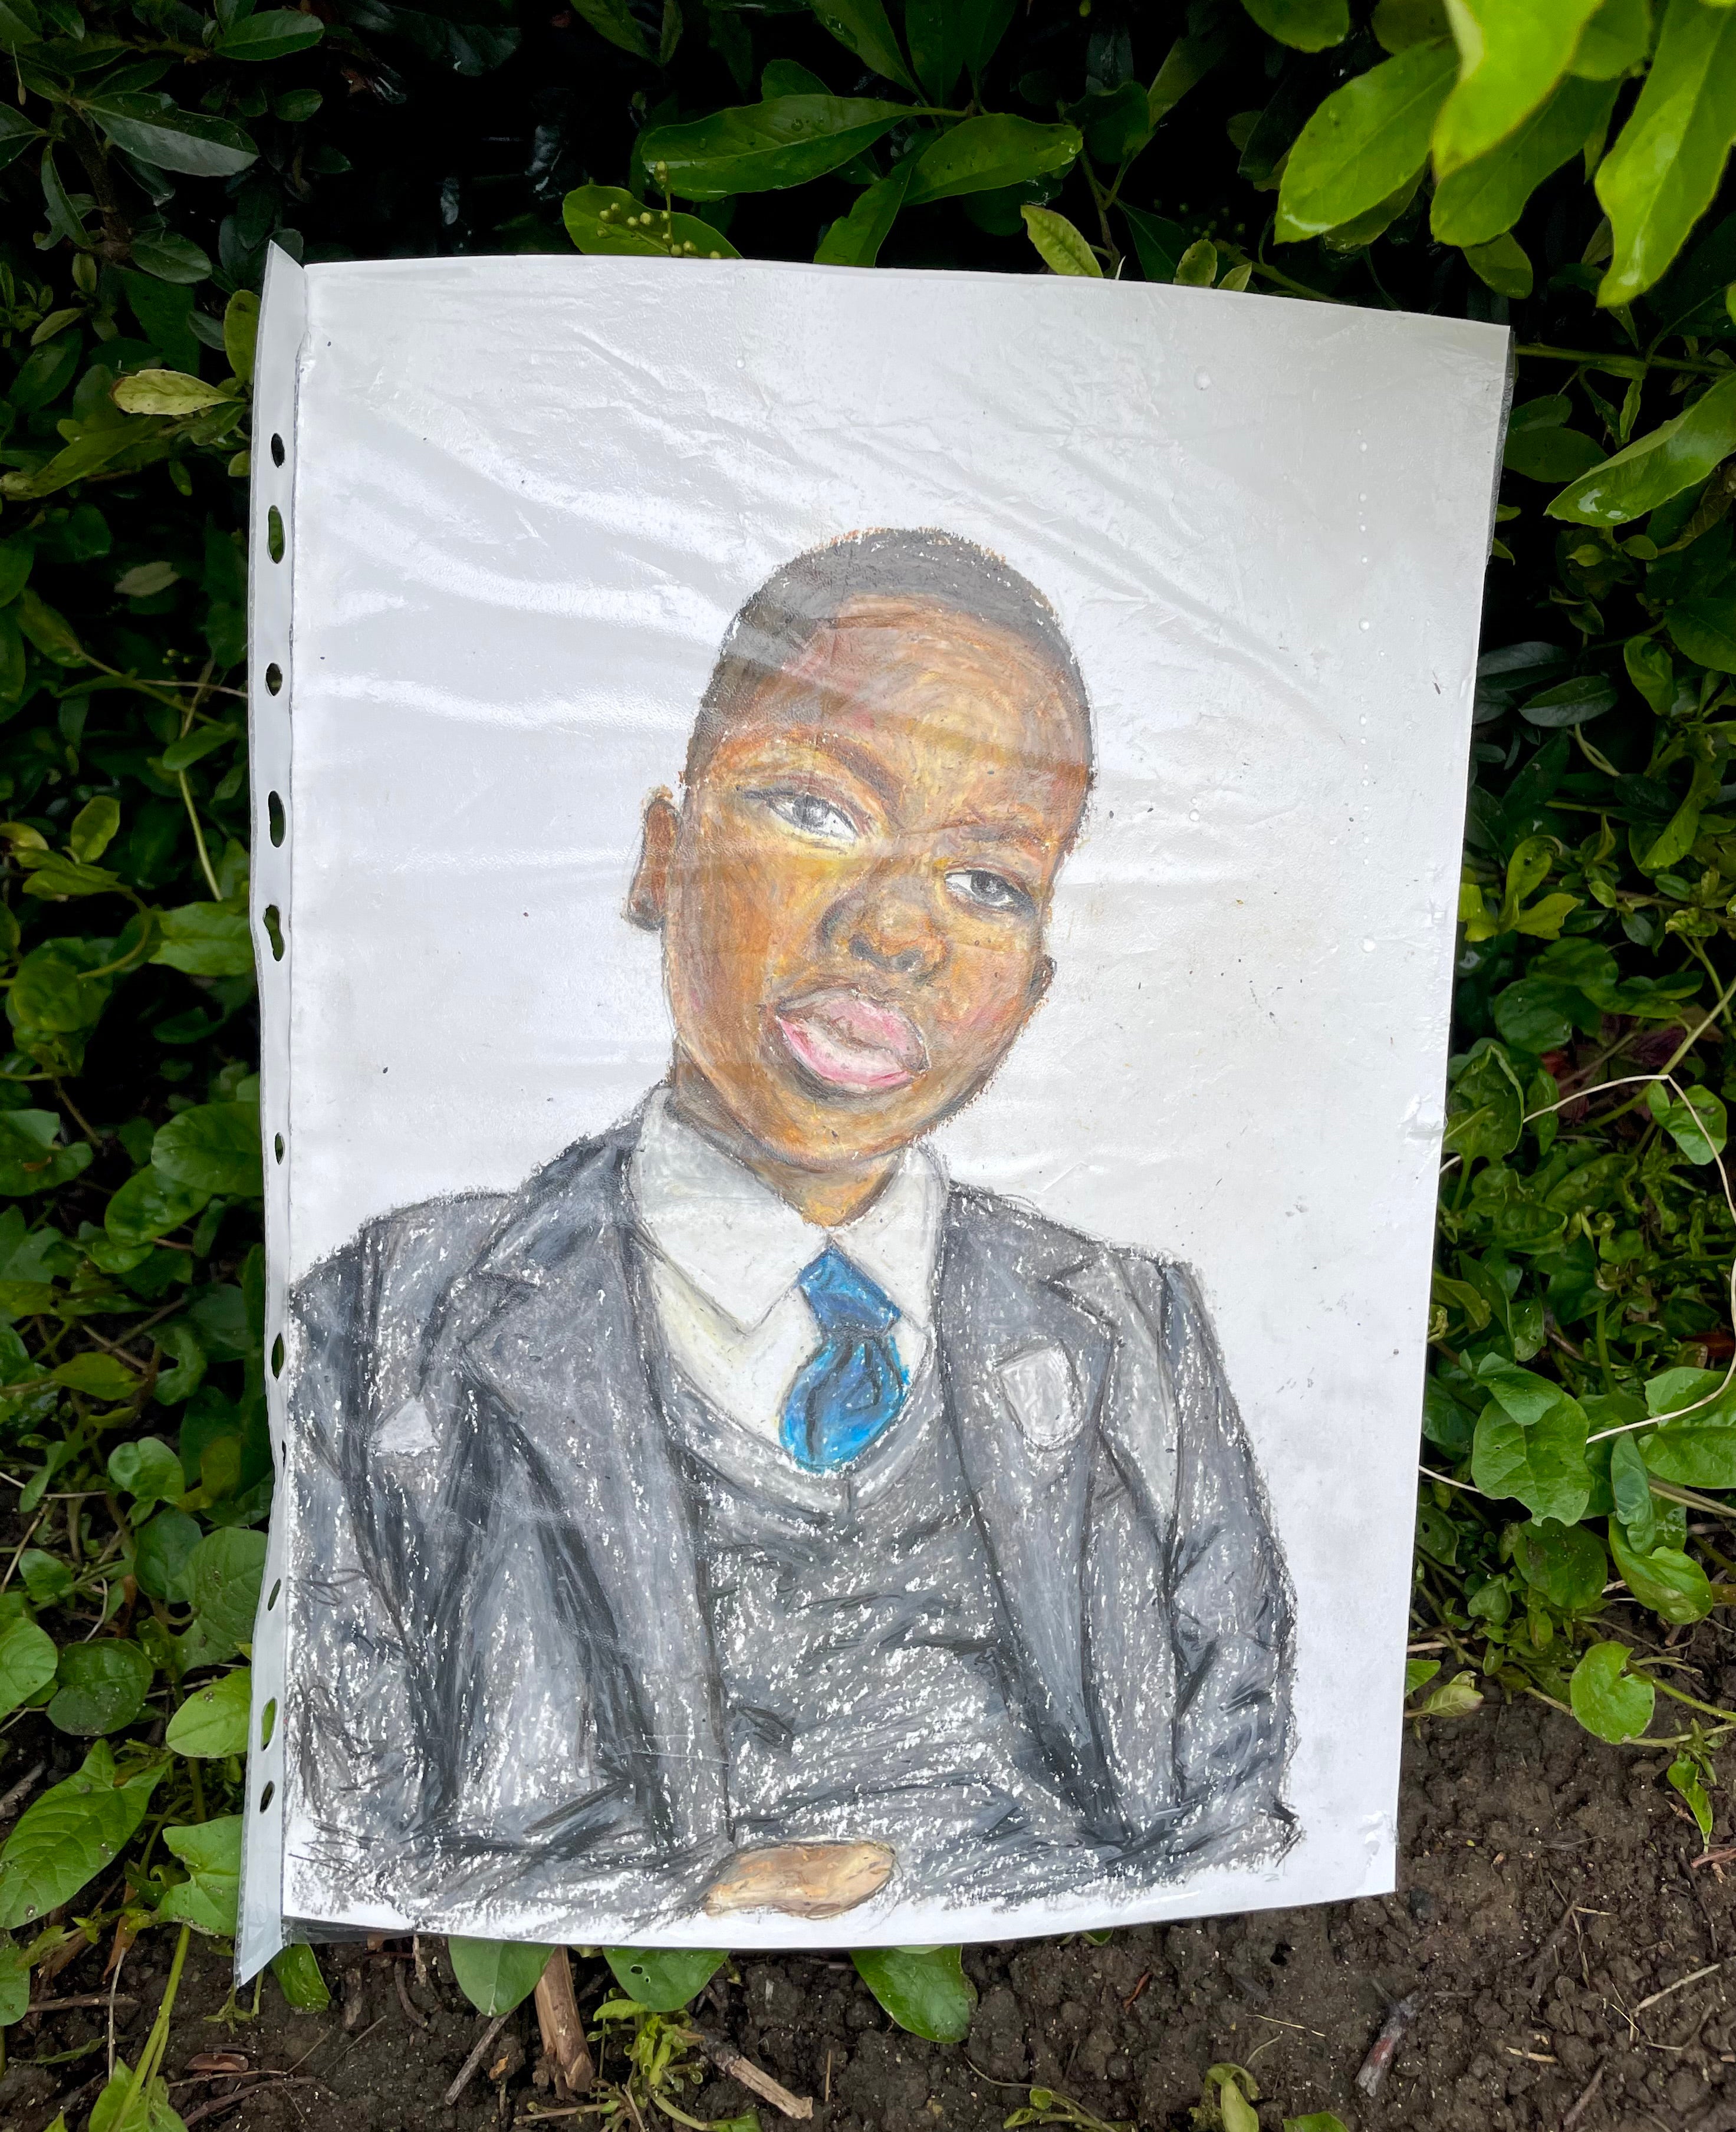 Artwork left with flowers near the scene in Hainault, north east London, where 14-year-old Daniel Anjorin was killed in a sword attack on Tuesday